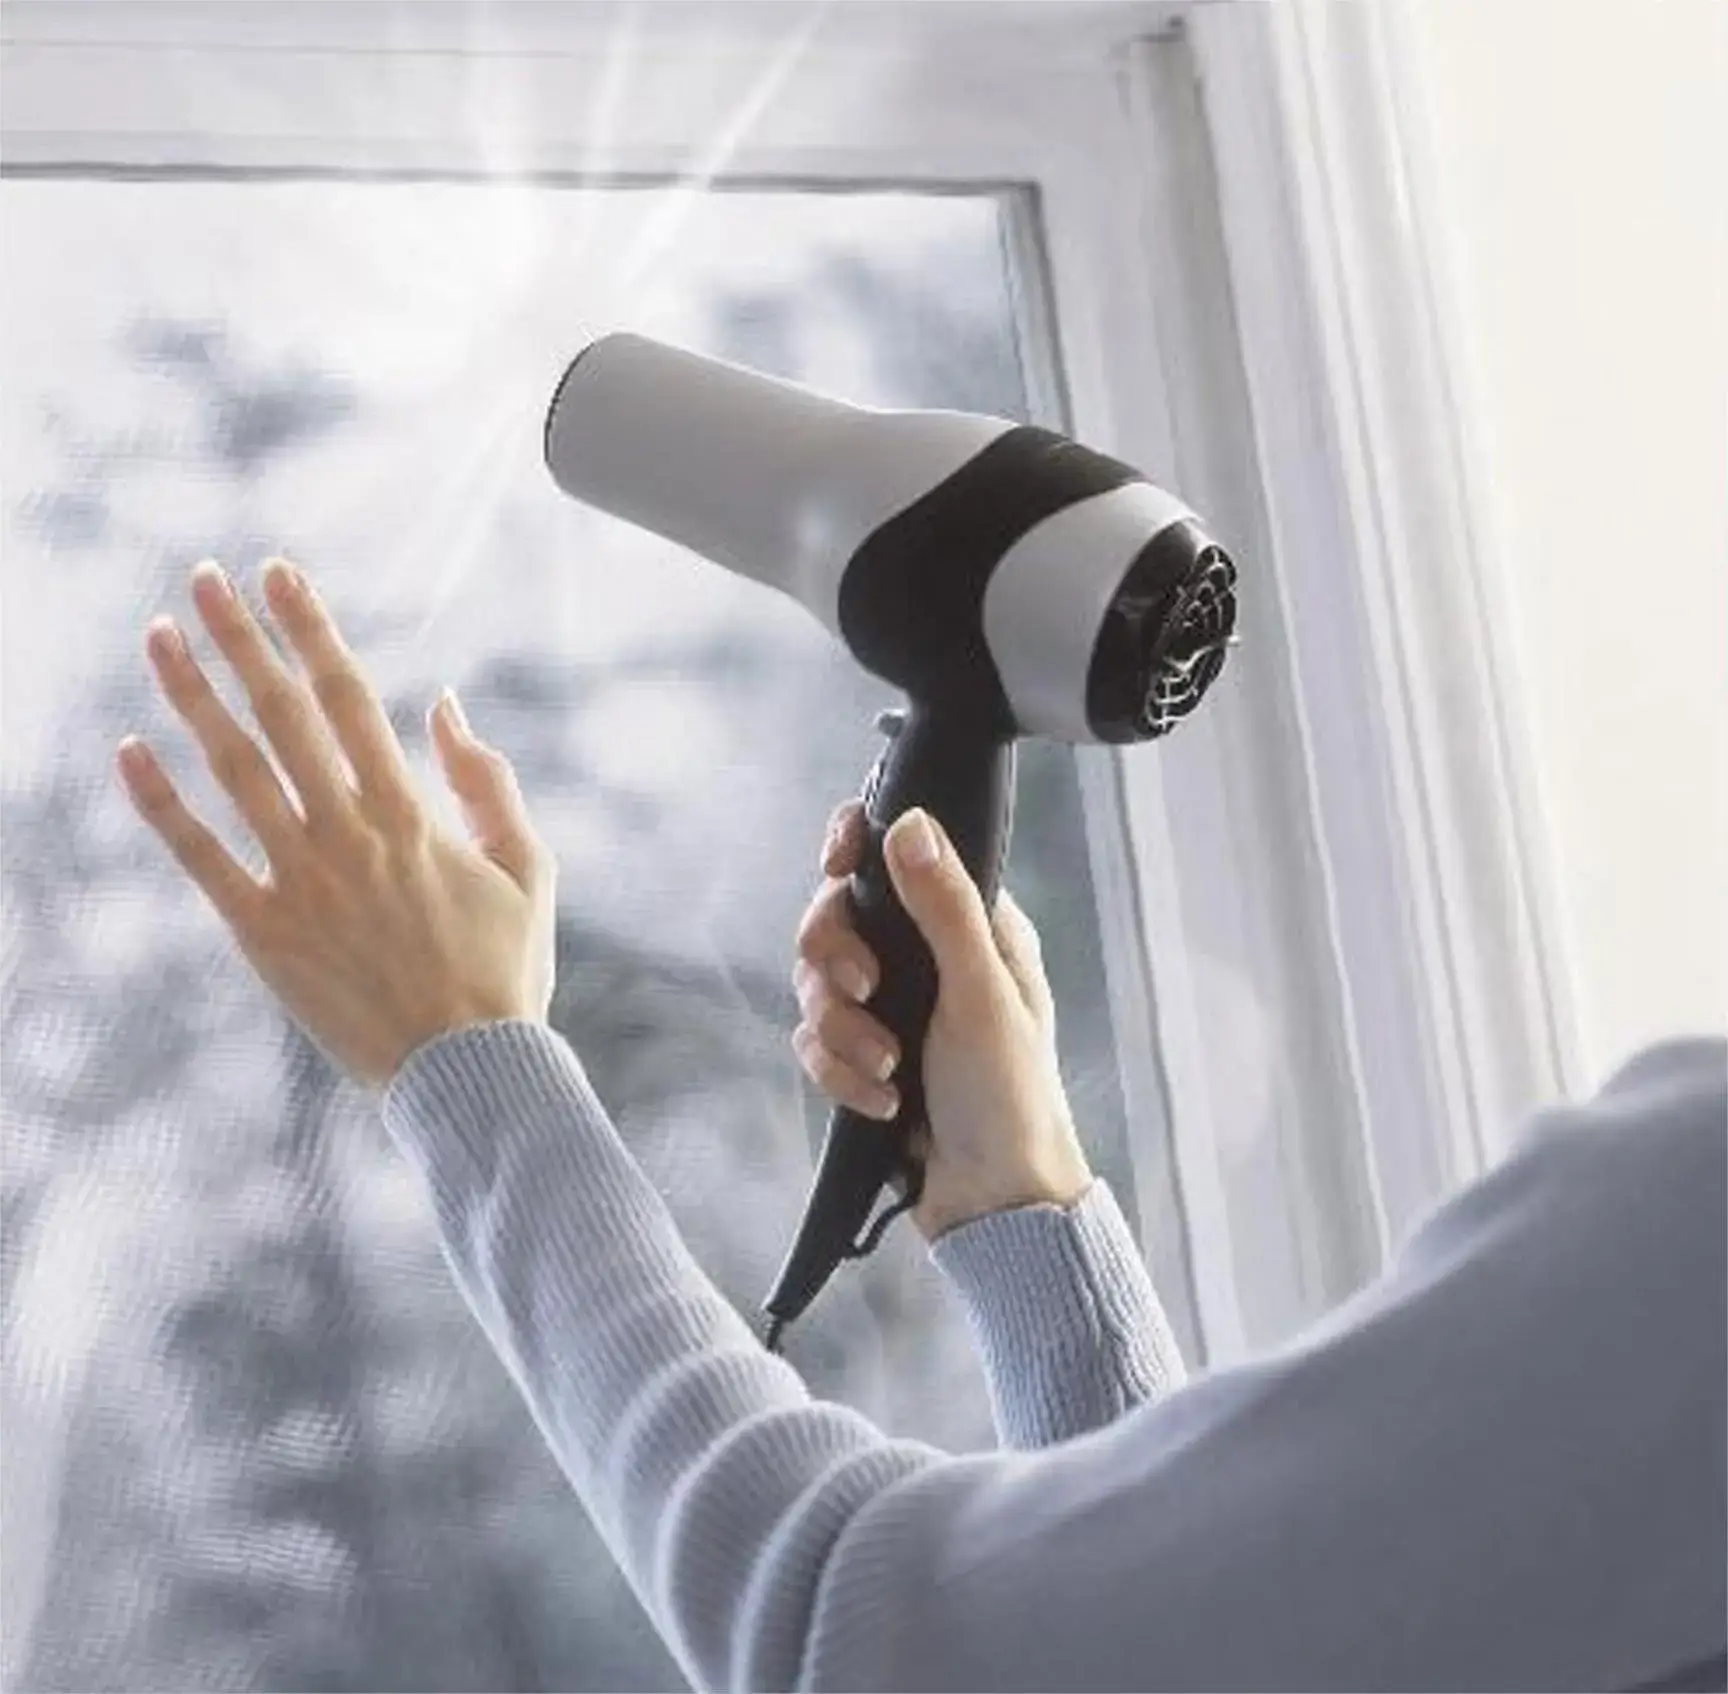 Removing moisture from a window pane using a hairdryer.